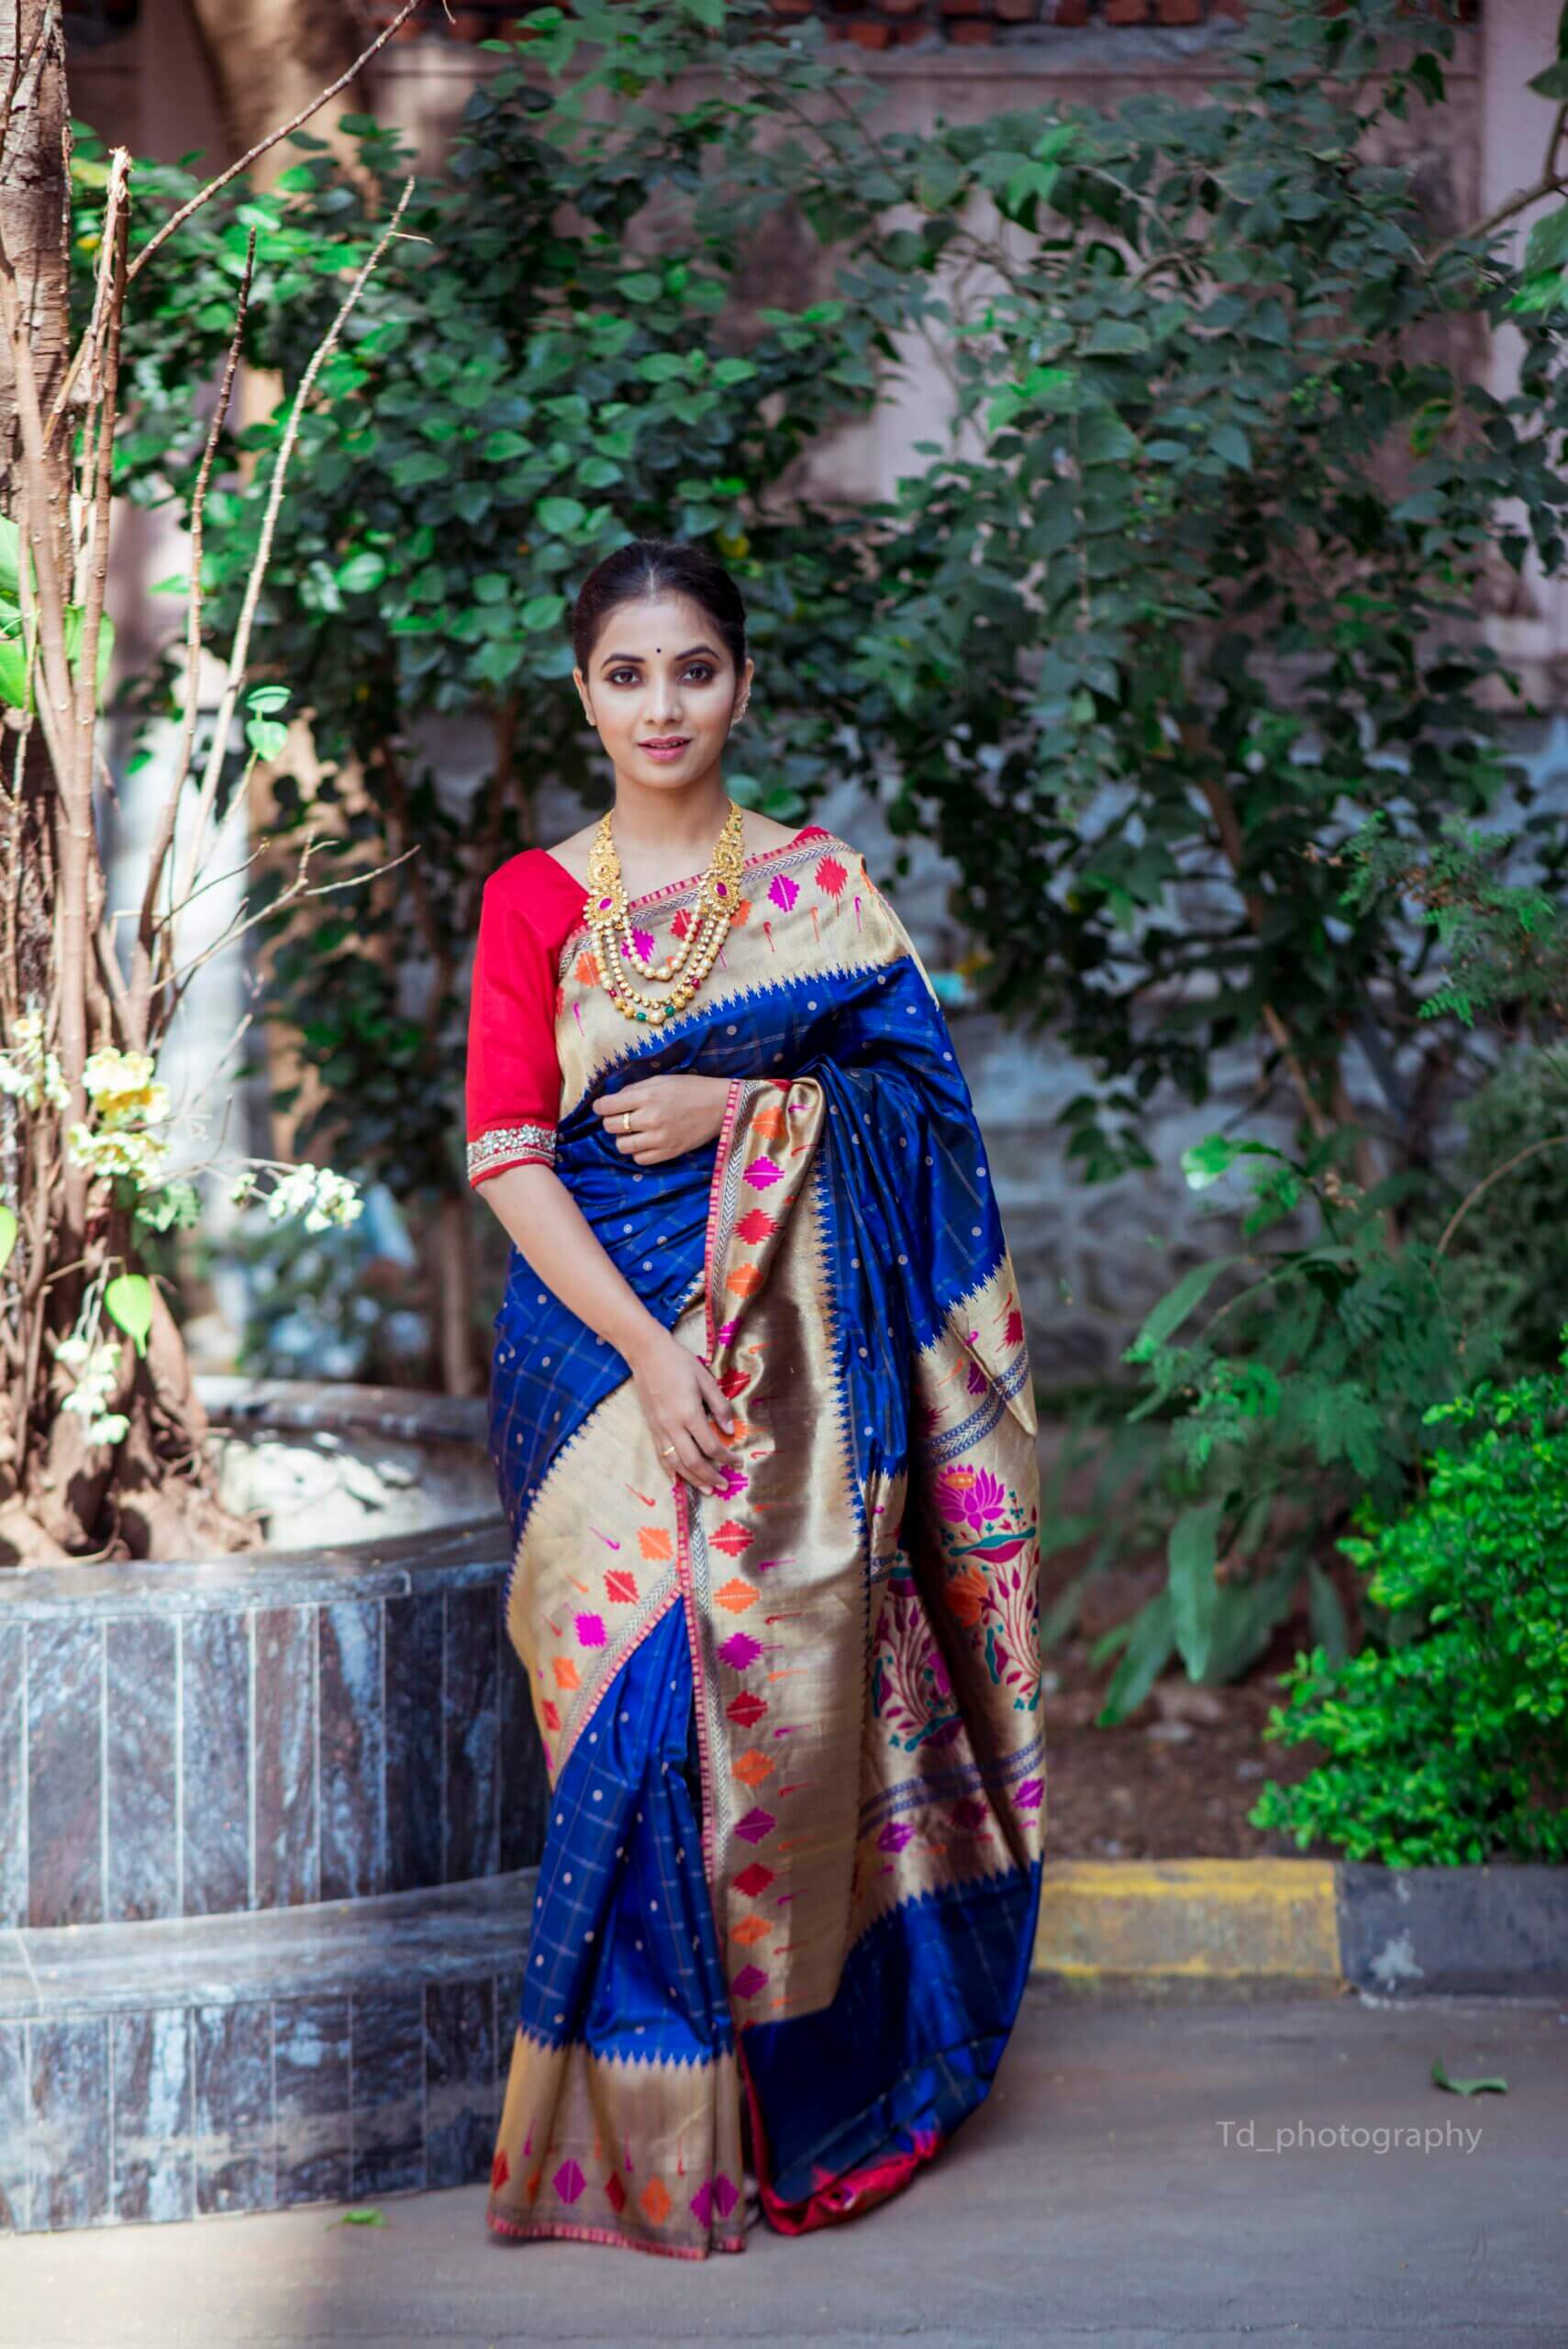 Sayali Sanjeev Look Desirable In a Blue & Golden Kanjivaram Saree Paired With Red Blouse